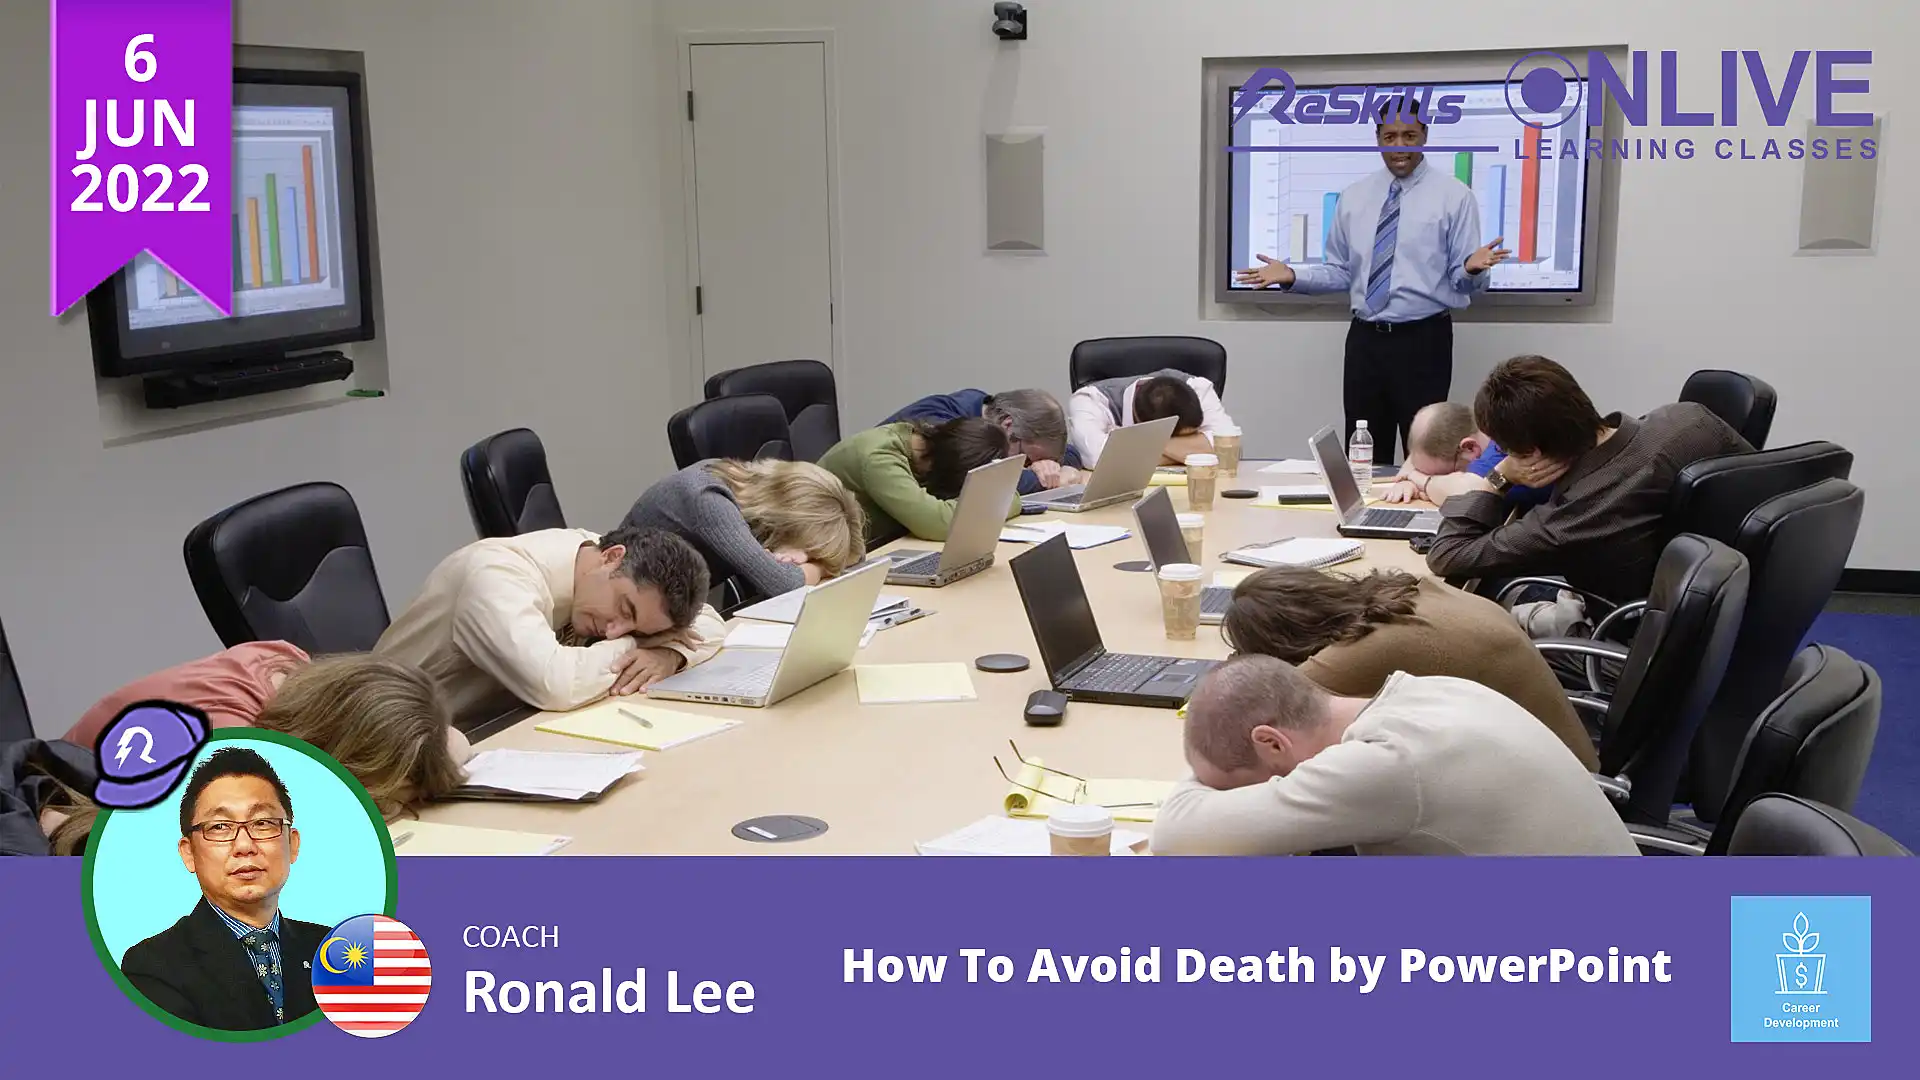 How To Avoid Death by PowerPoint - ReSkills